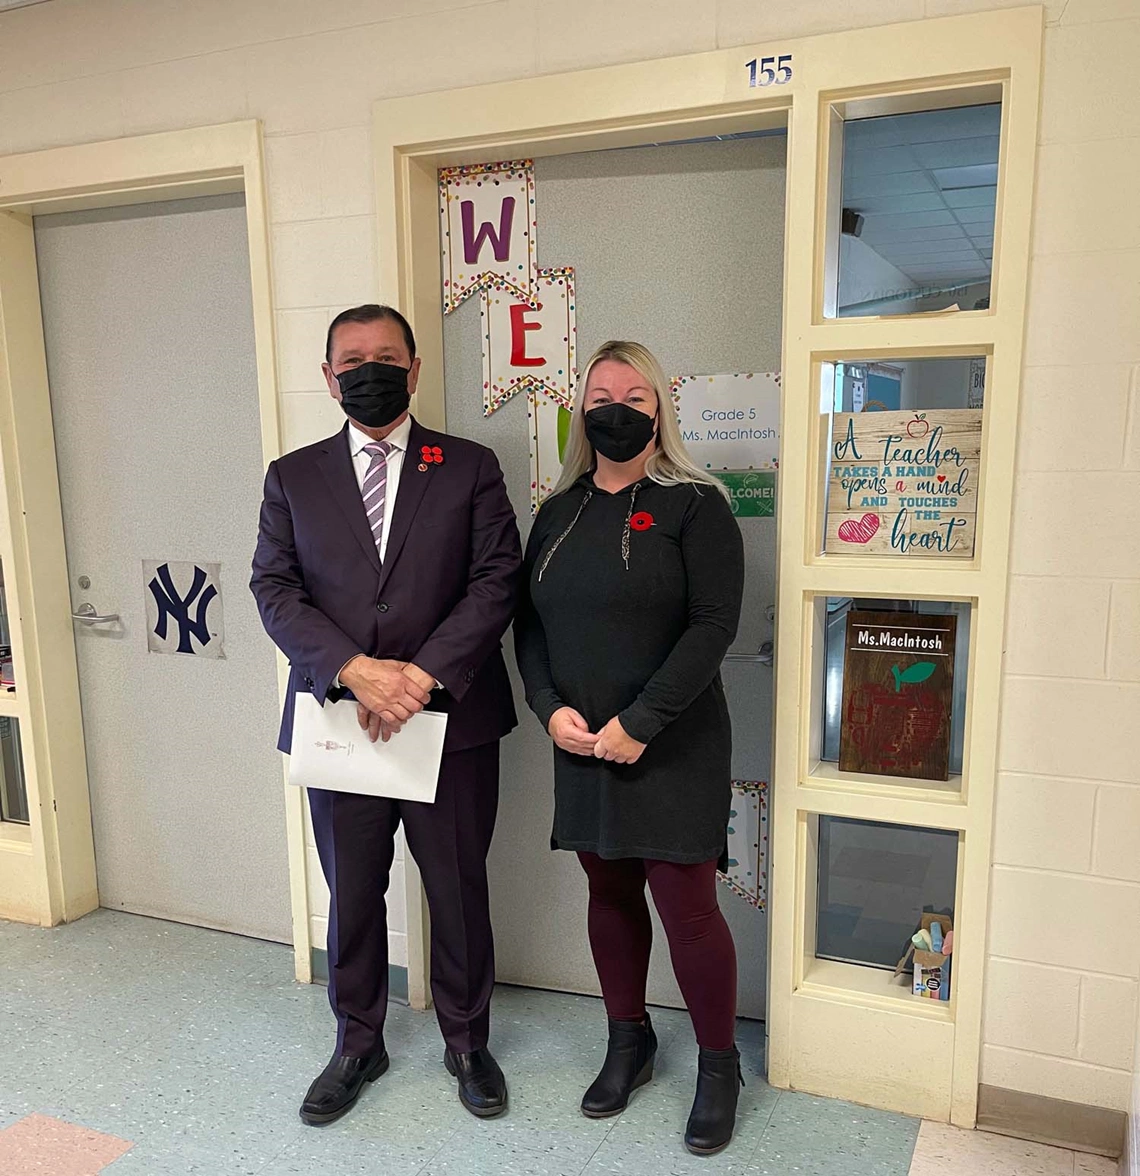 Tuesday, November 9, 2021 – Senator Brian Francis is welcomed by vice-principal Amanda MacIntosh during a visit to Donagh Regional School in Prince Edward Island. Senator Francis discussed the history of residential schools and reconciliation with Grade 5 students.